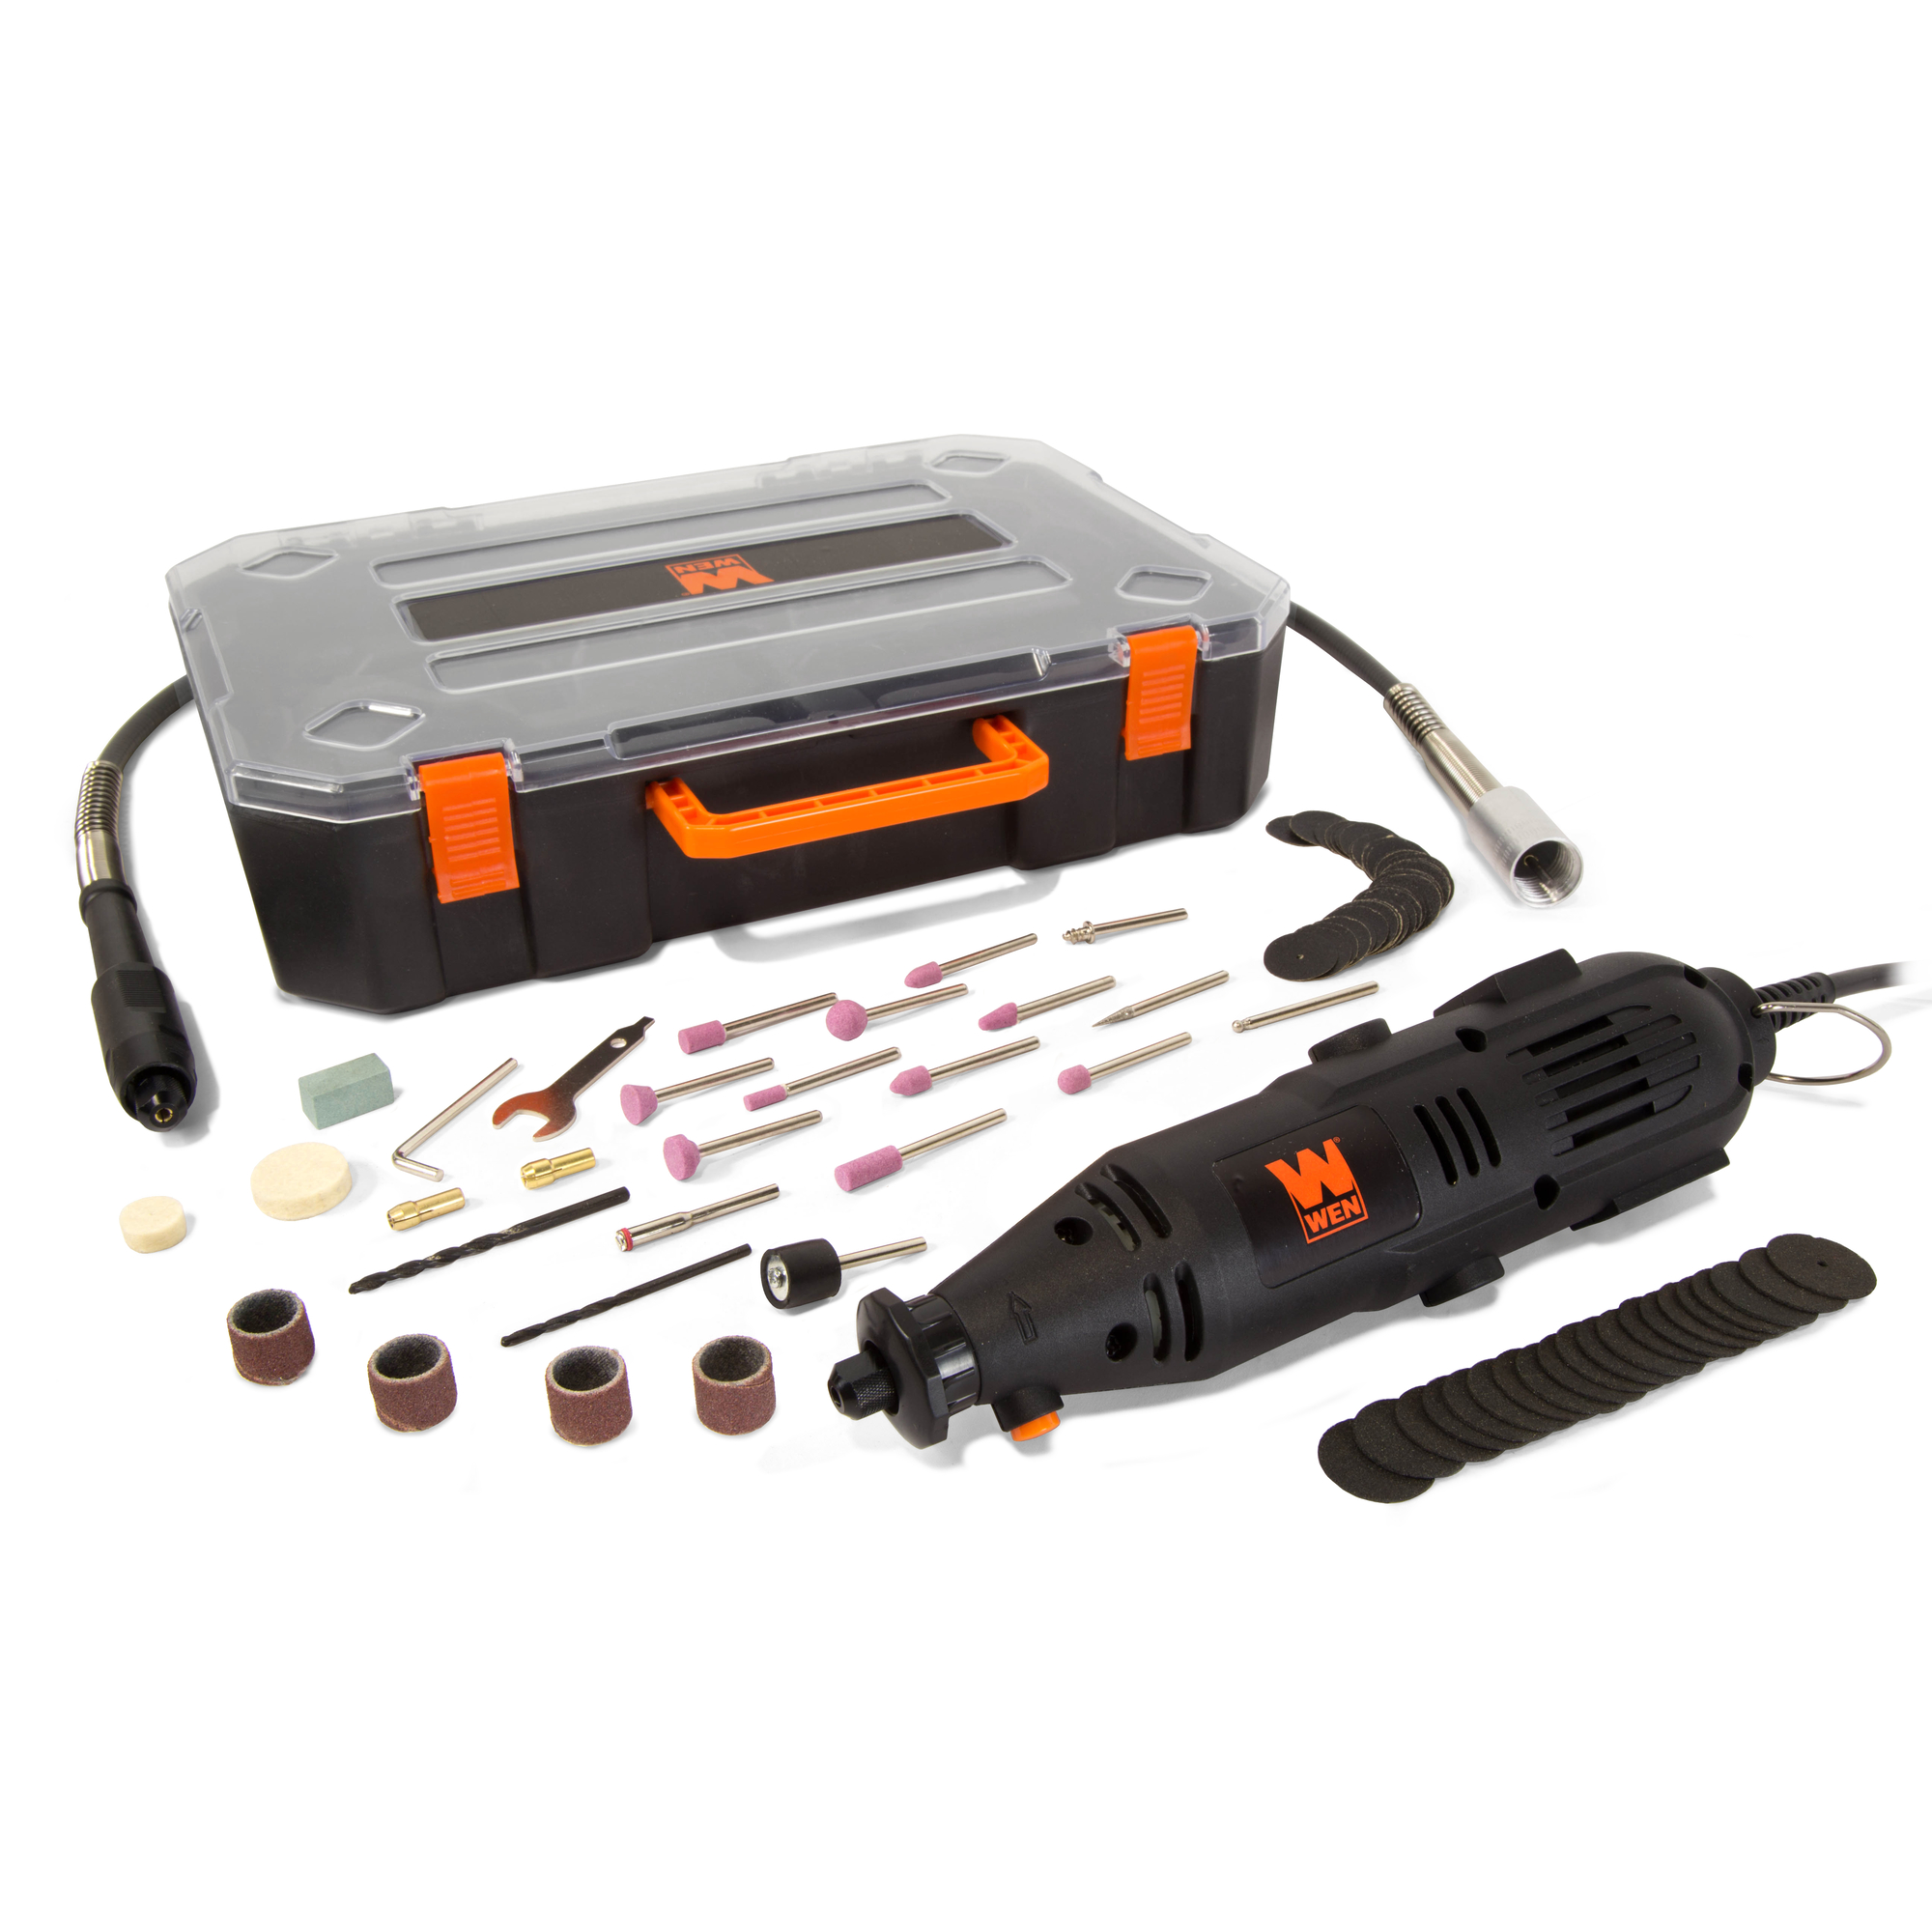 WEN, 1-A Rotary Tool w/ 100+ pcs, Case and Flex Shaft, Max. Speed 32000 rpm, Amps 1 Volts 120 Model 23103